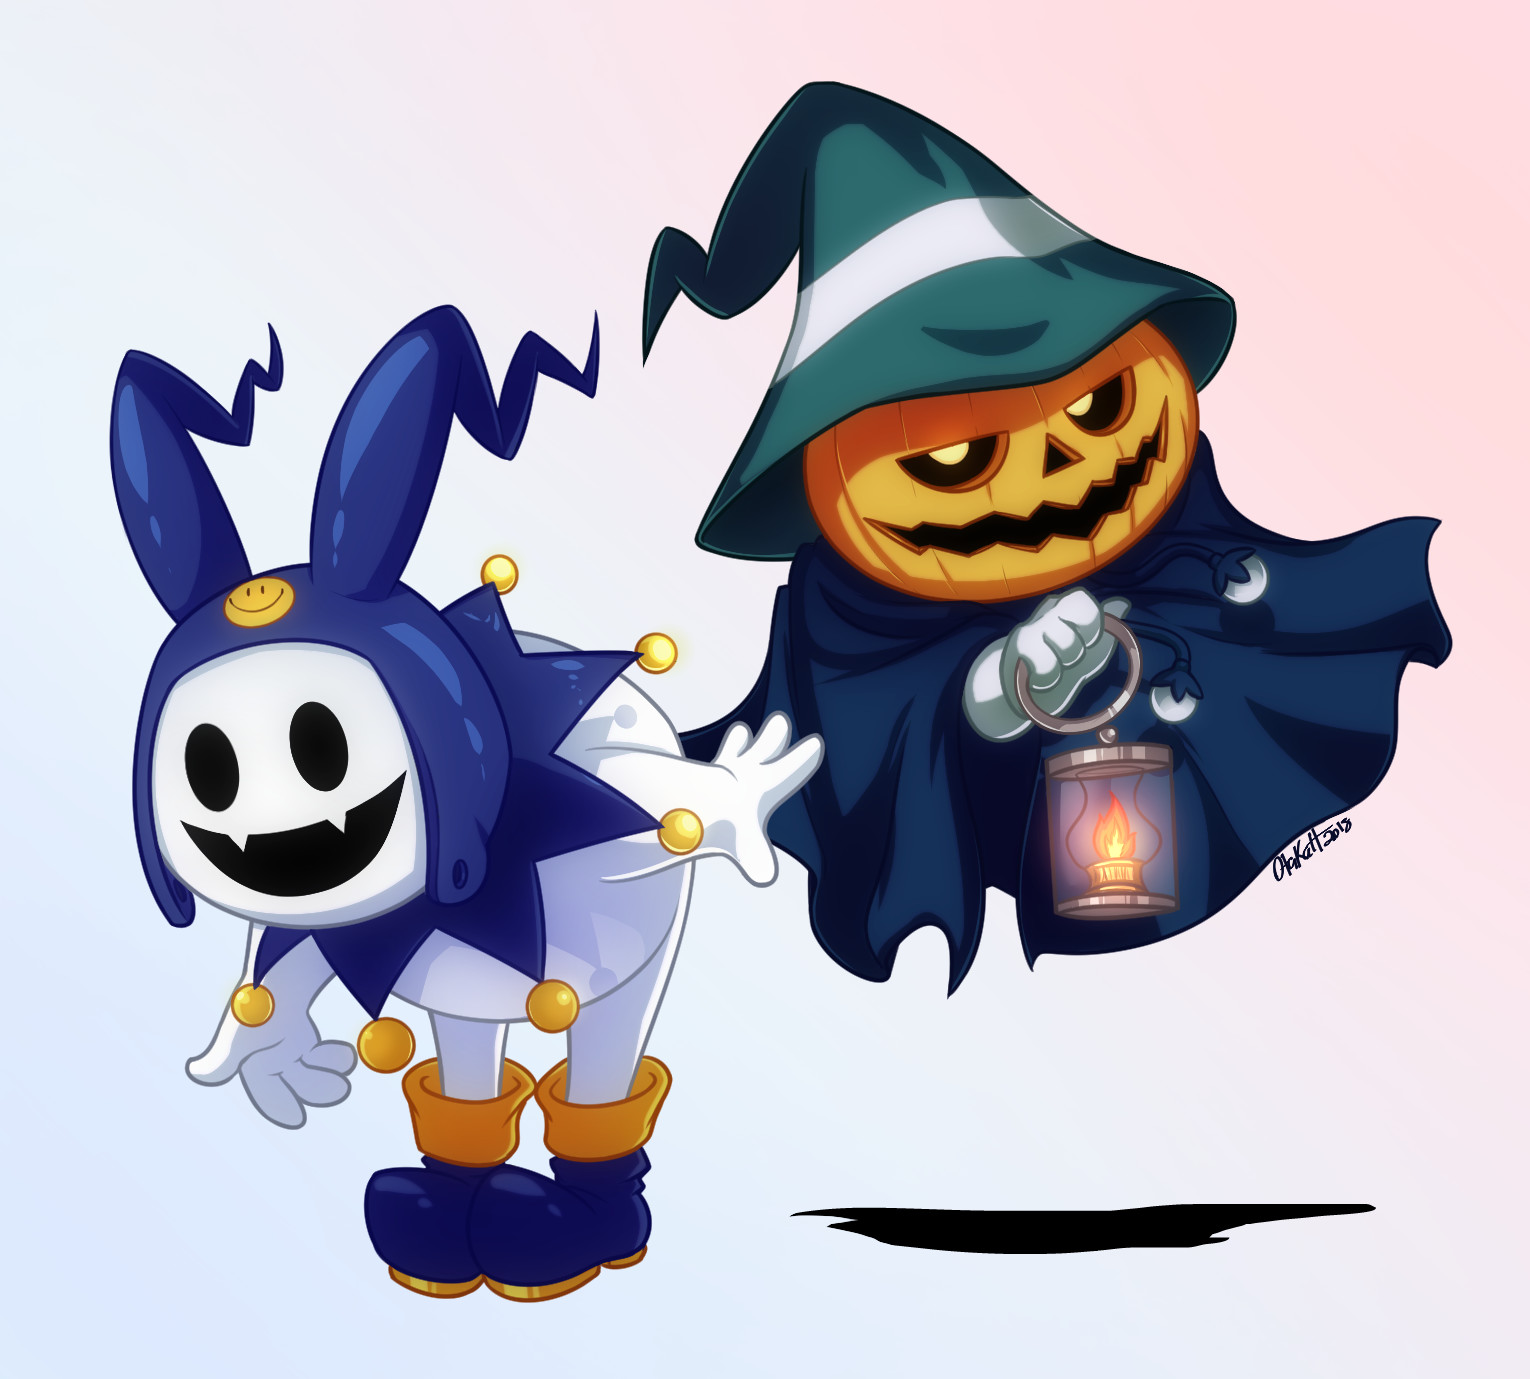 Jack Frost and Pyro Jack from the Shin Megami Tensei and Persona series. 